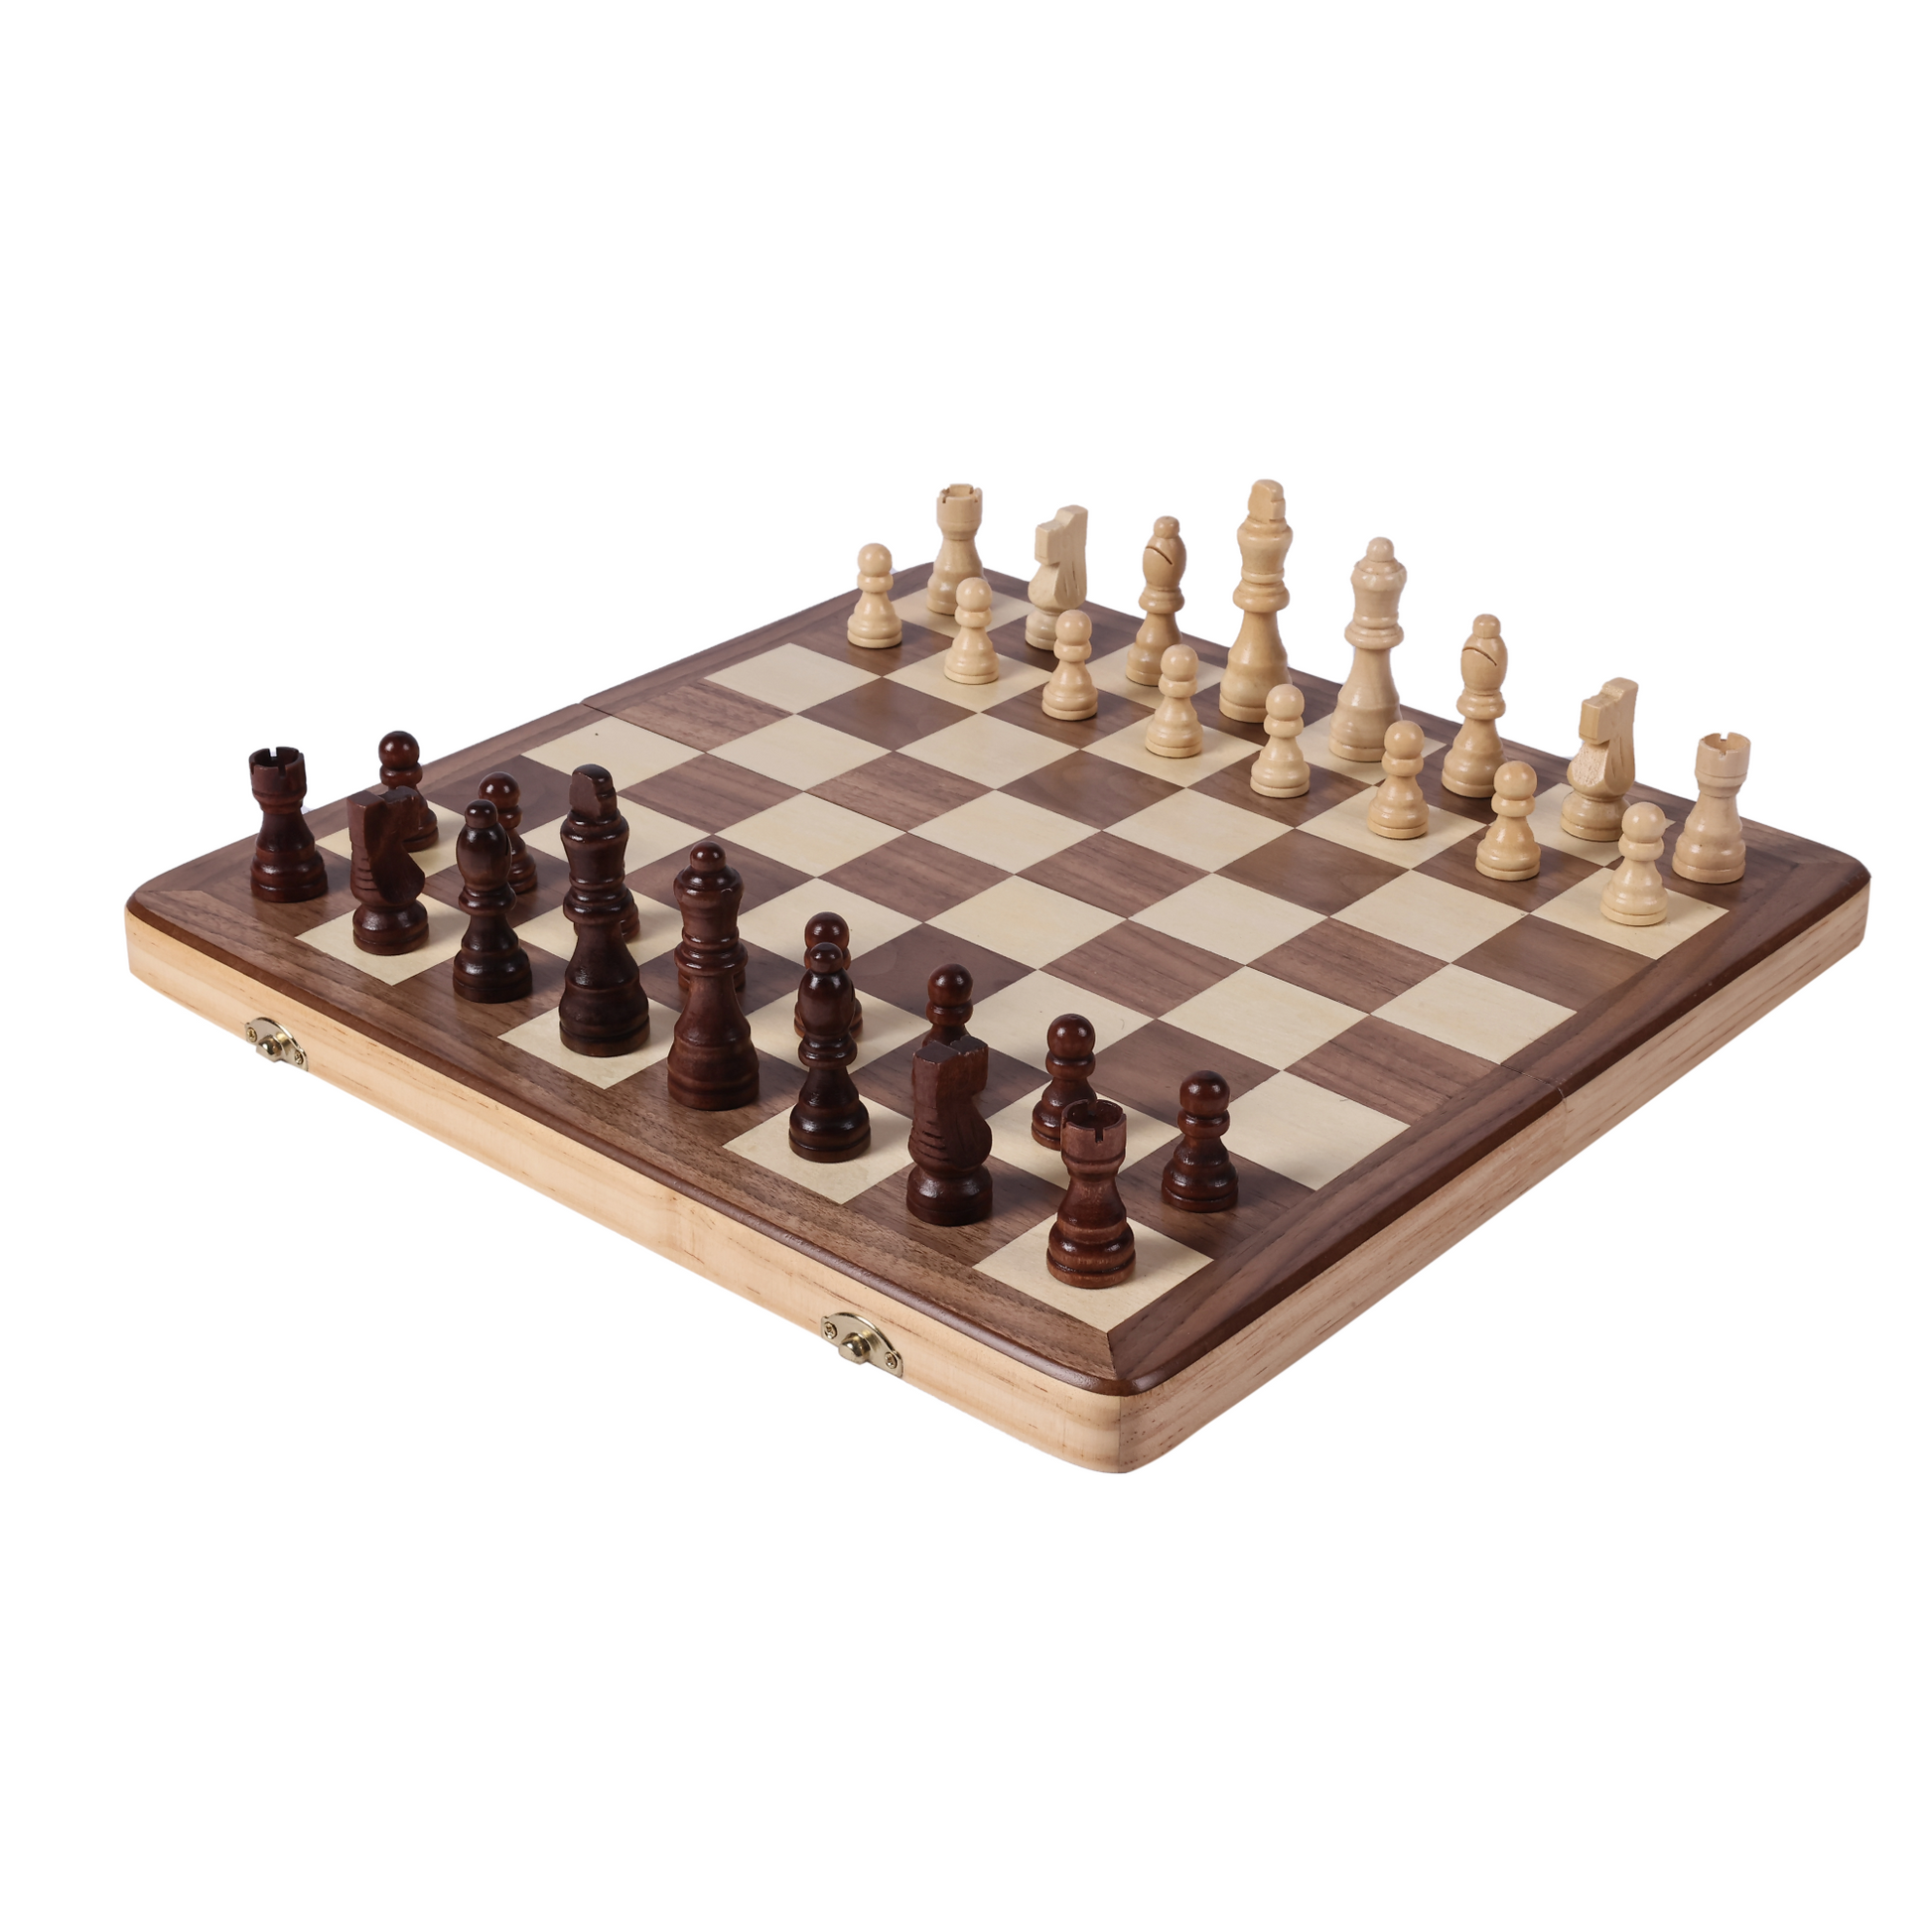 OUMODA Luxury Magnetic Wooden Chess Game Set - 15 Walnut Chess Board with  Stylish Chess Pieces - 2 Extra Queens, Strap-Style Elastic Rope Storage